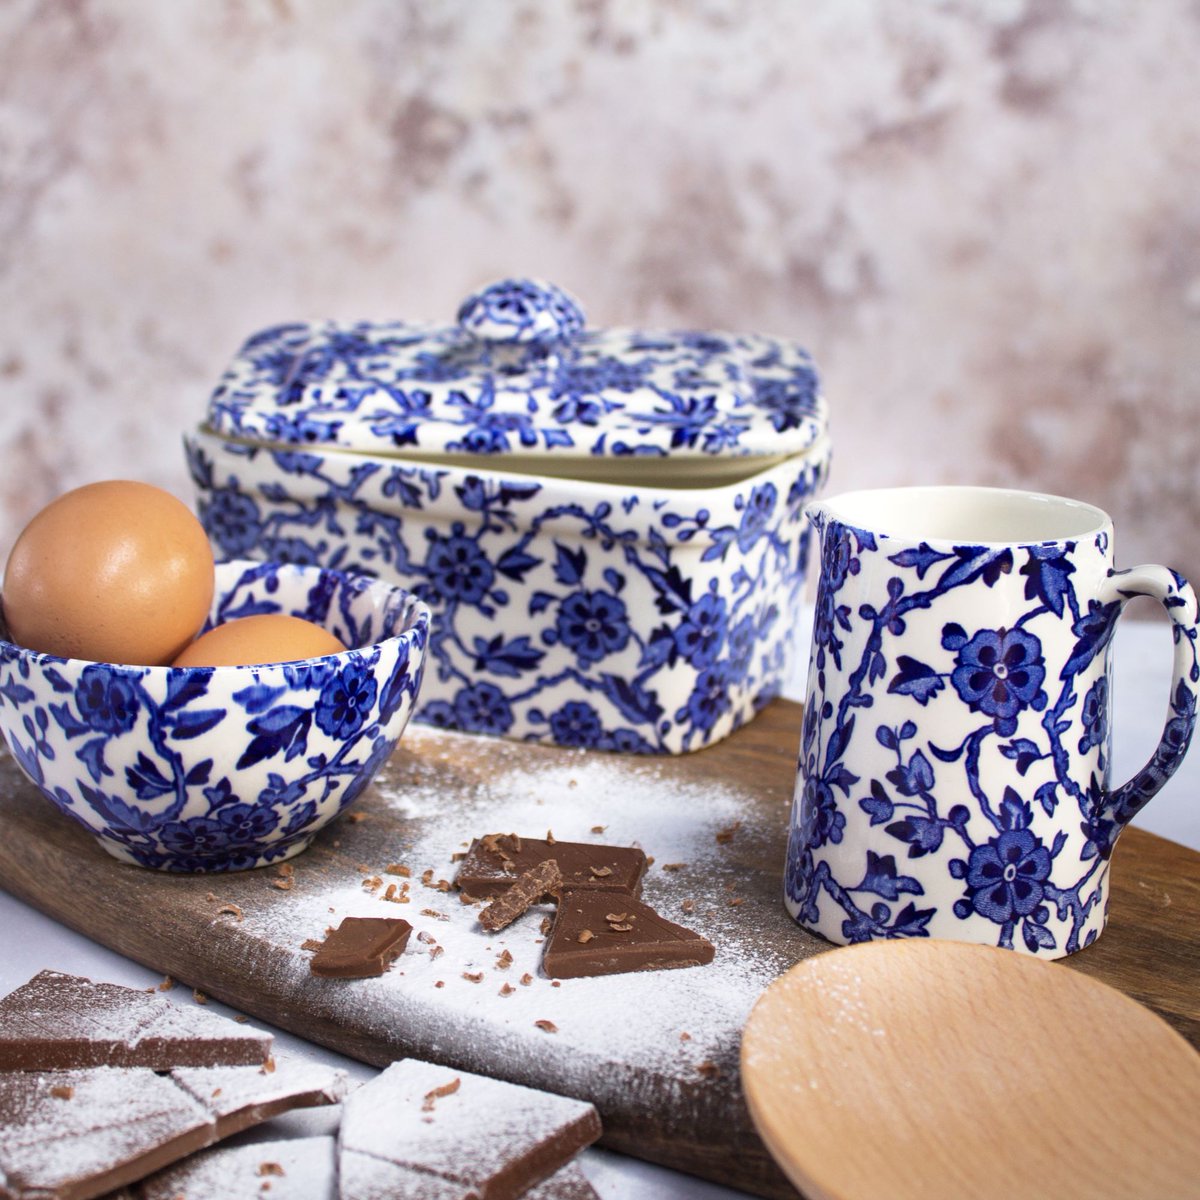 Today is #worldchocolateday and what could be sweeter than cooking up something delicious and serving it upon the beautiful, Blue Arden⁠ #BurleighPottery